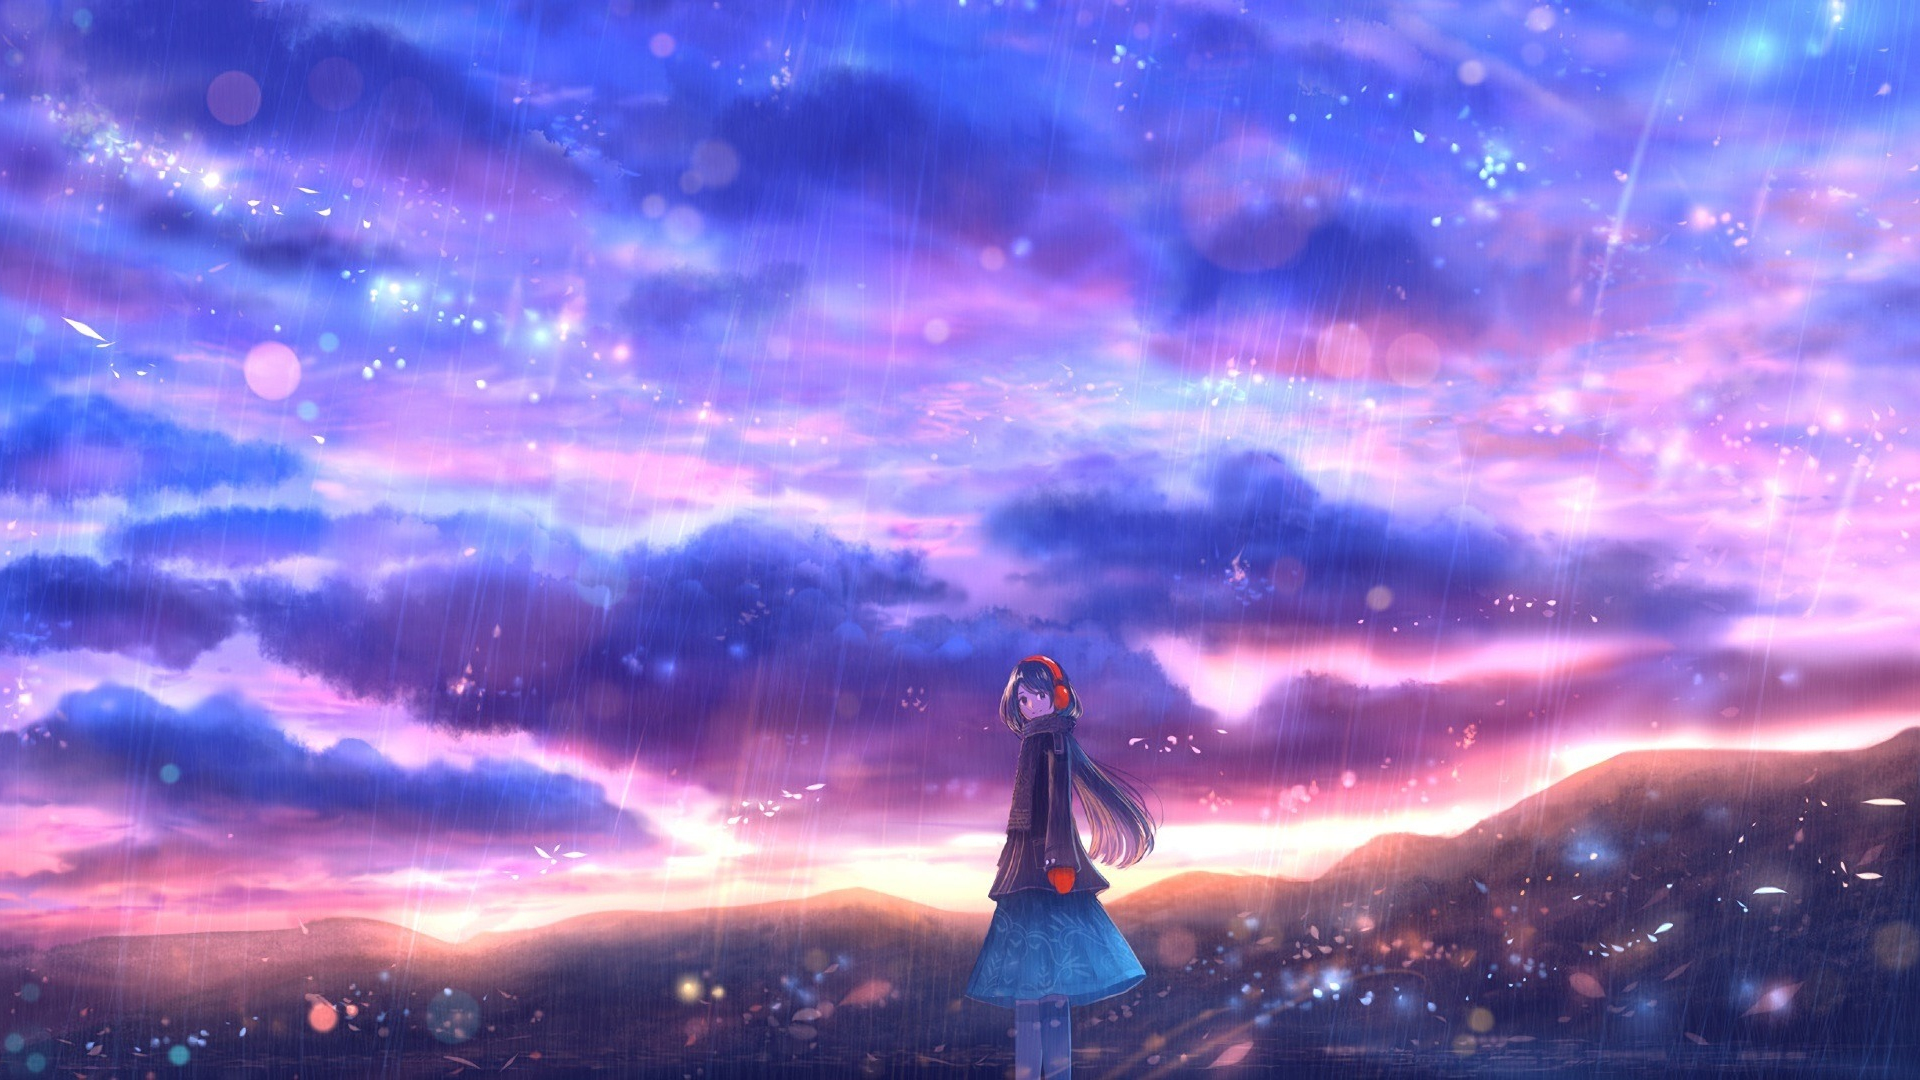 Download wallpaper 1920x1200 rain, clouds, colorful, sky, anime girl ...